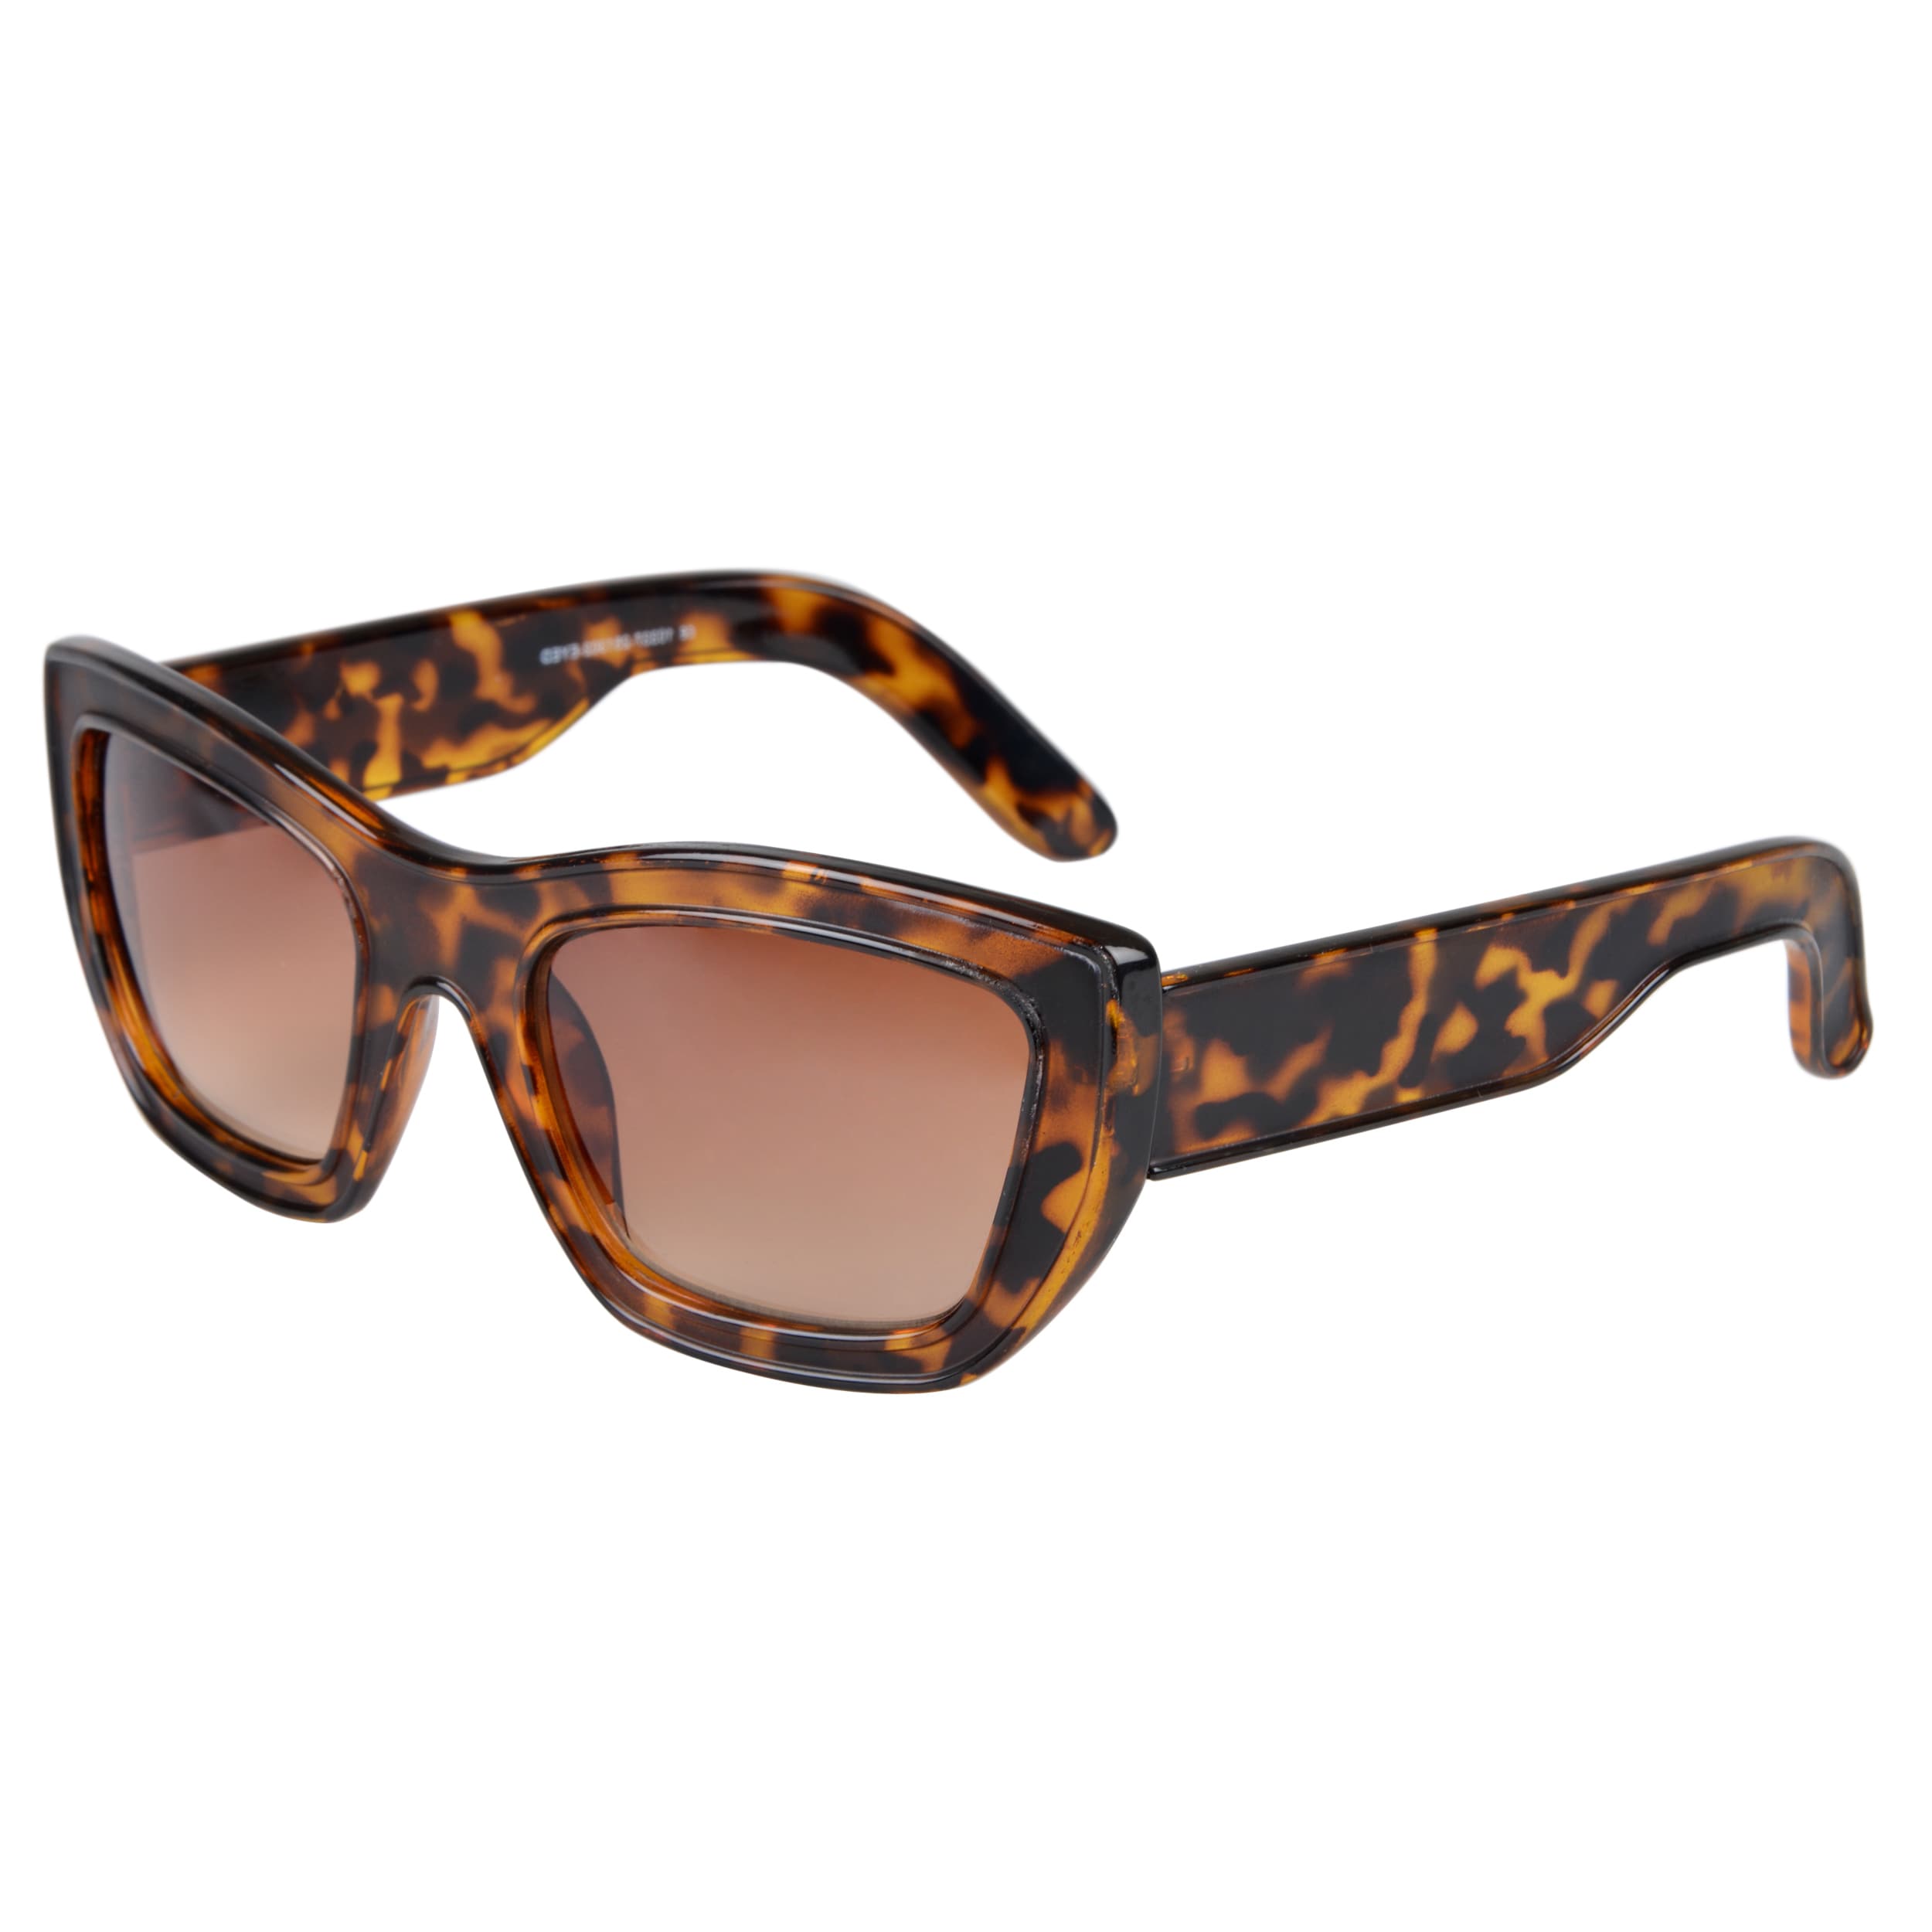 Journee Collection Womens Black and tortoise Wide Frame Fashion Sunglasses